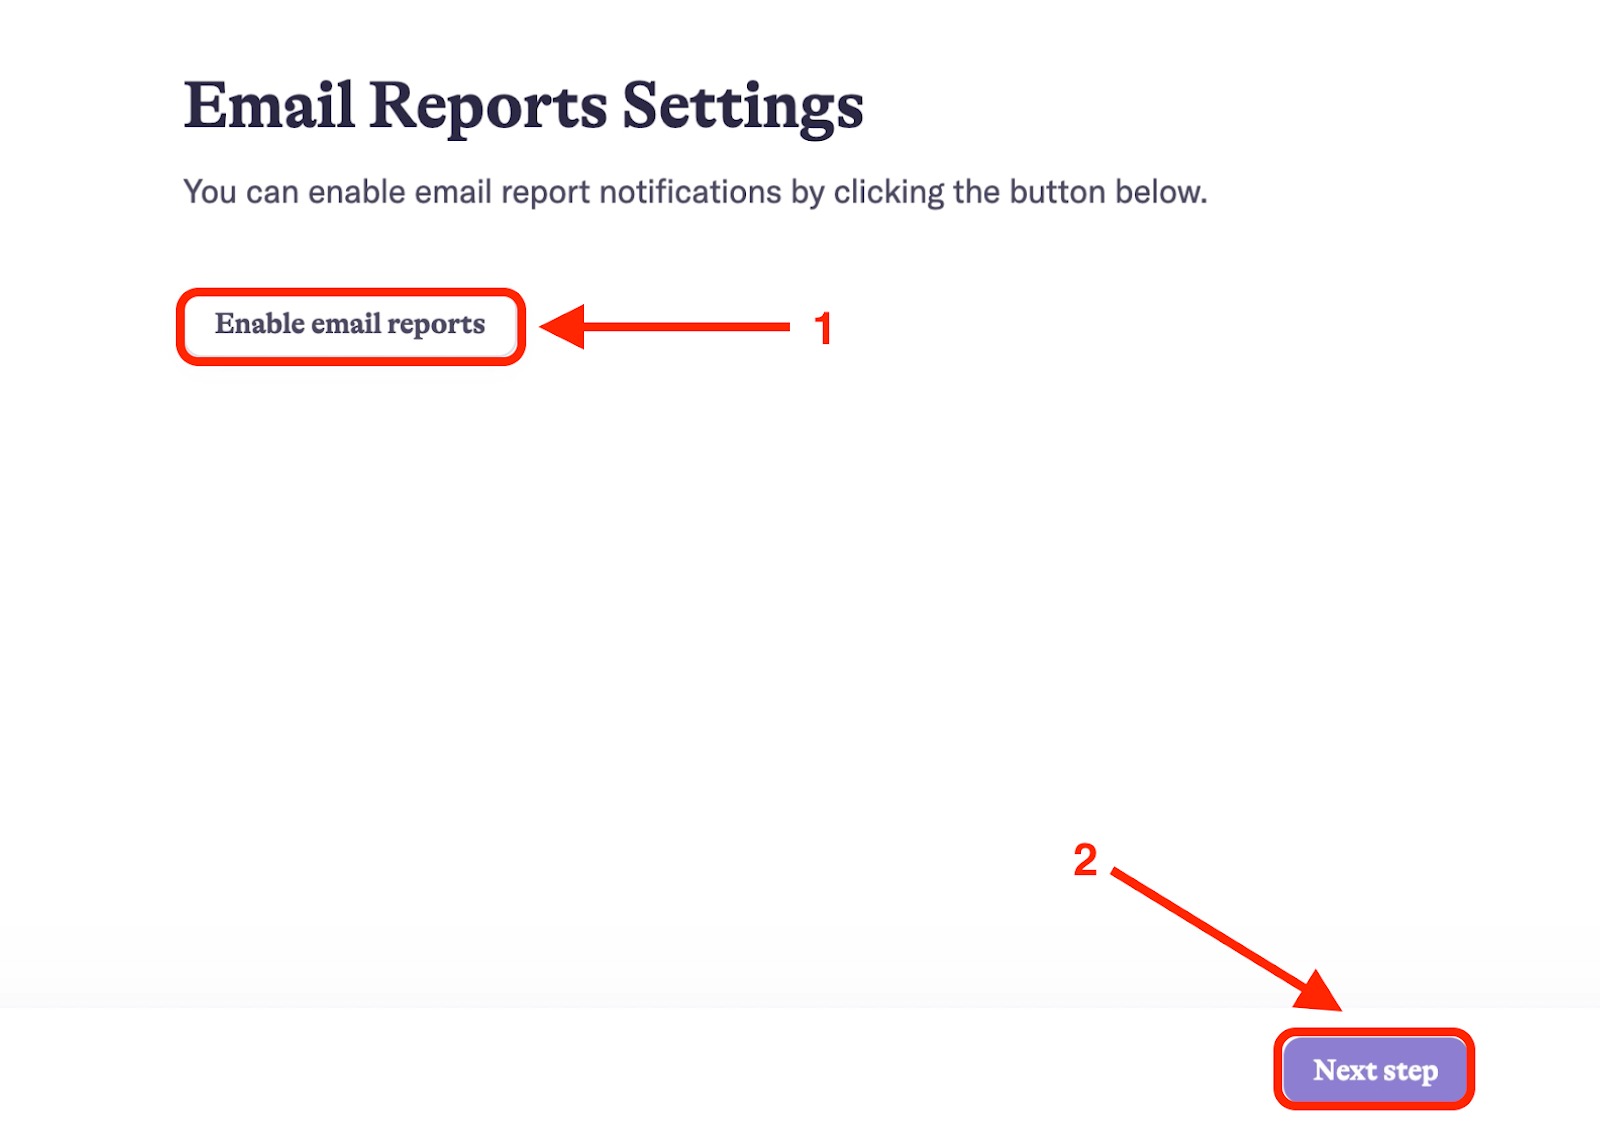 Enable email notifications and click the Next step button, to finish the initial set up.